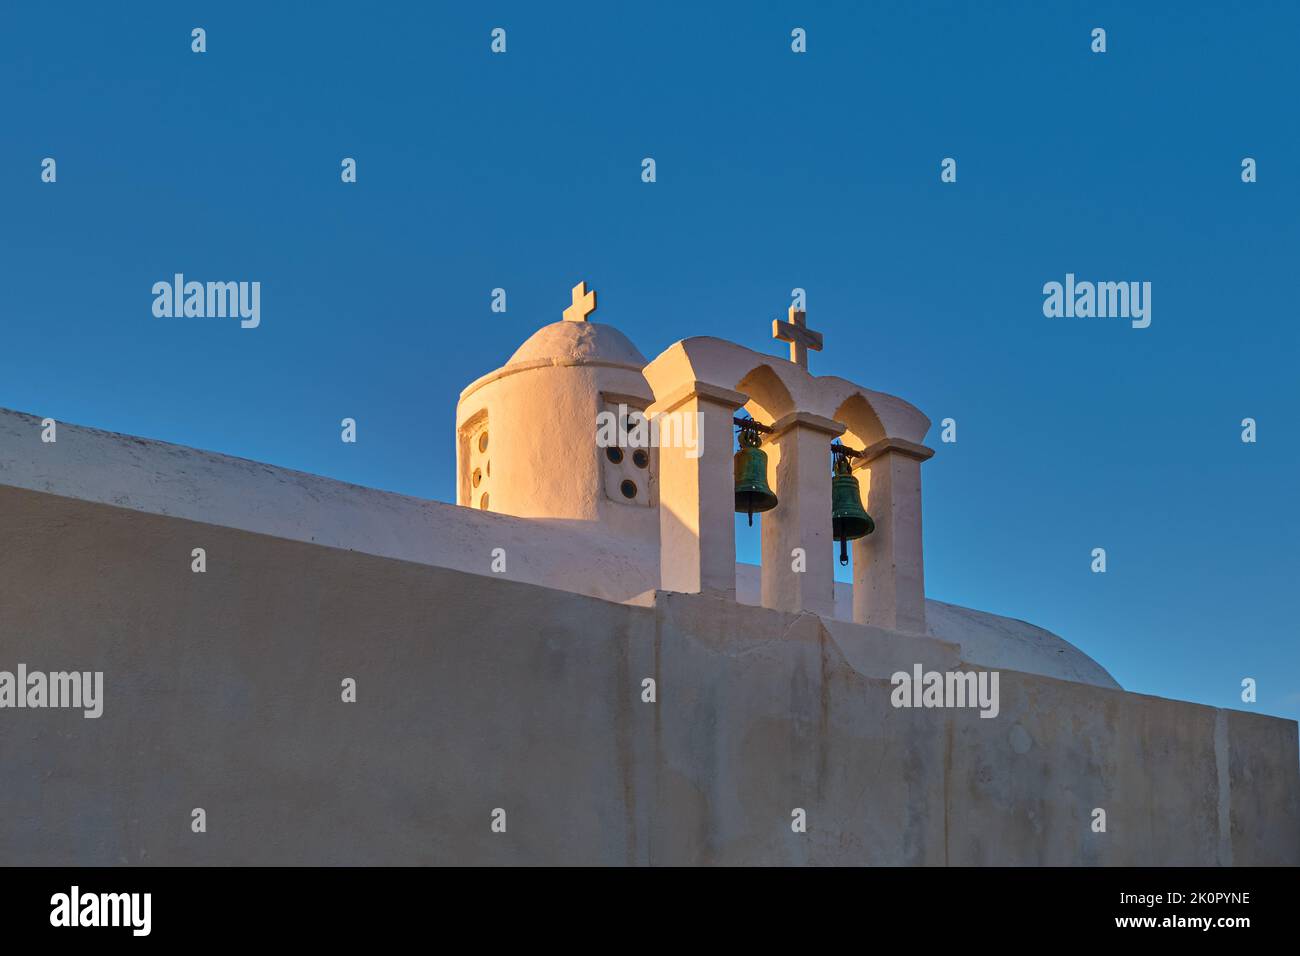 Whitewashed Greek Orthodox chapel, small belfry with cross and bell, roof and dome at sunset sky background. Close-up shot. Milos island, Greece Stock Photo